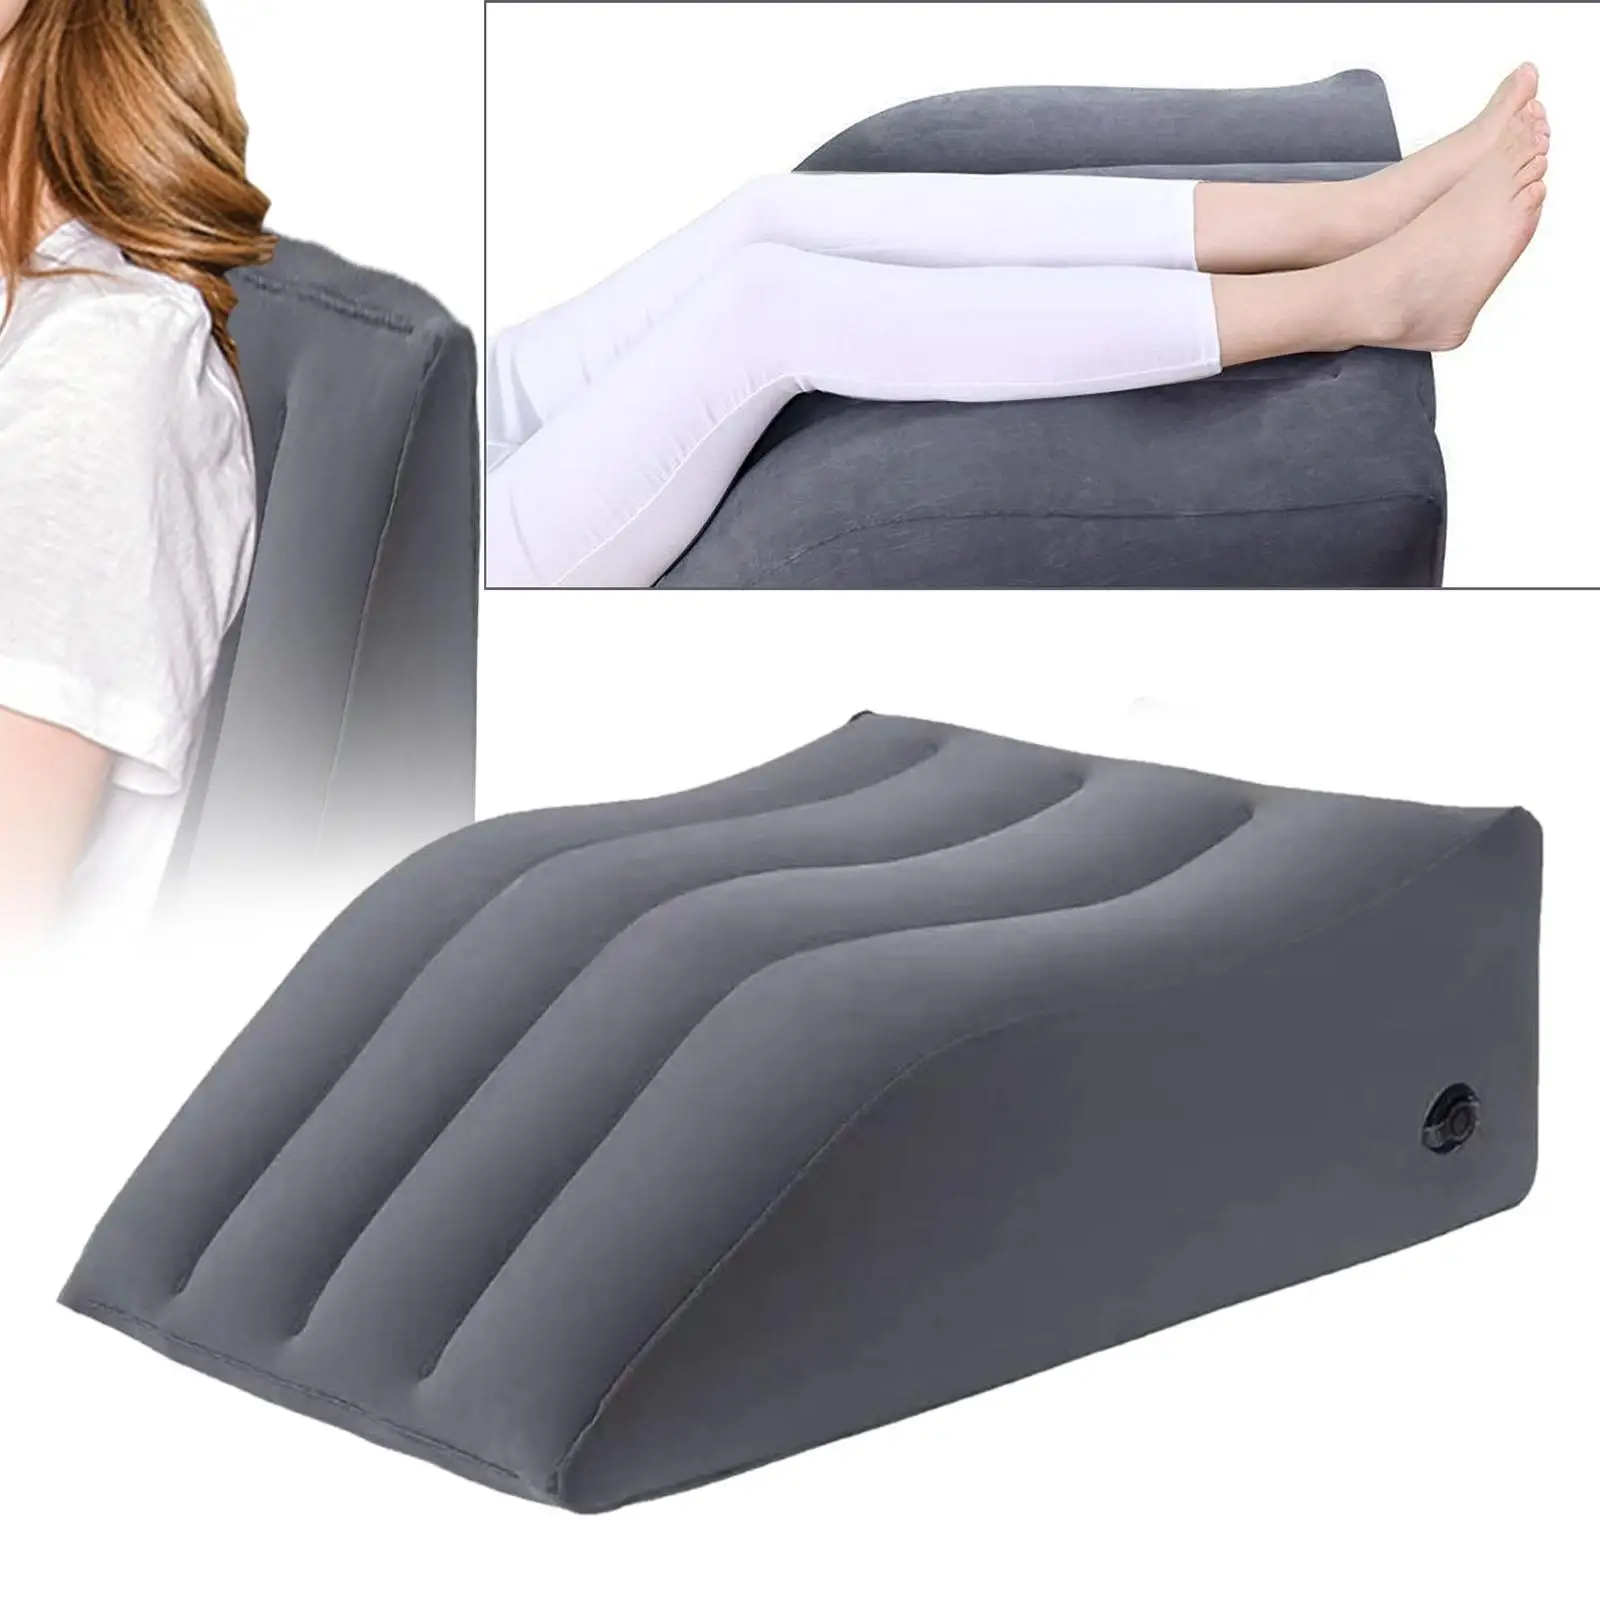 Portable Wedge Pillow Feet Pillow Easy to Blow Lower Back Leg Pillow for Travel Sleeping Car Camping Reading